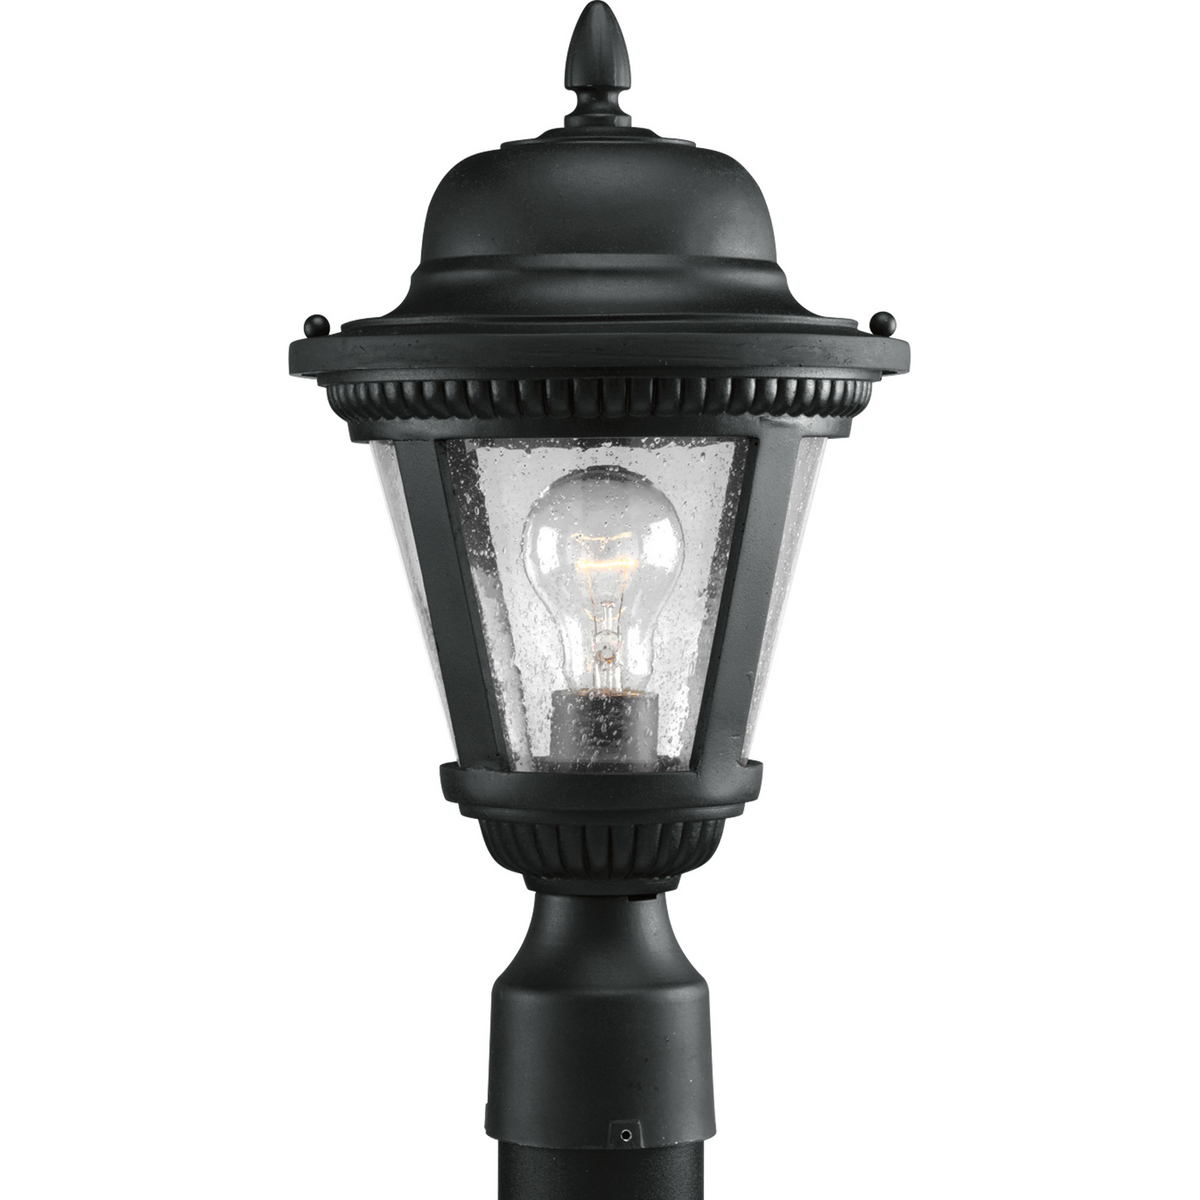 Add a touch of rustic appeal and classic styling with beaded detailing in the Westport collection. Clear seeded glass compliments the durable powder coat finish in die-cast aluminum frames. One-light 9 in post lantern. Textured Black finish.